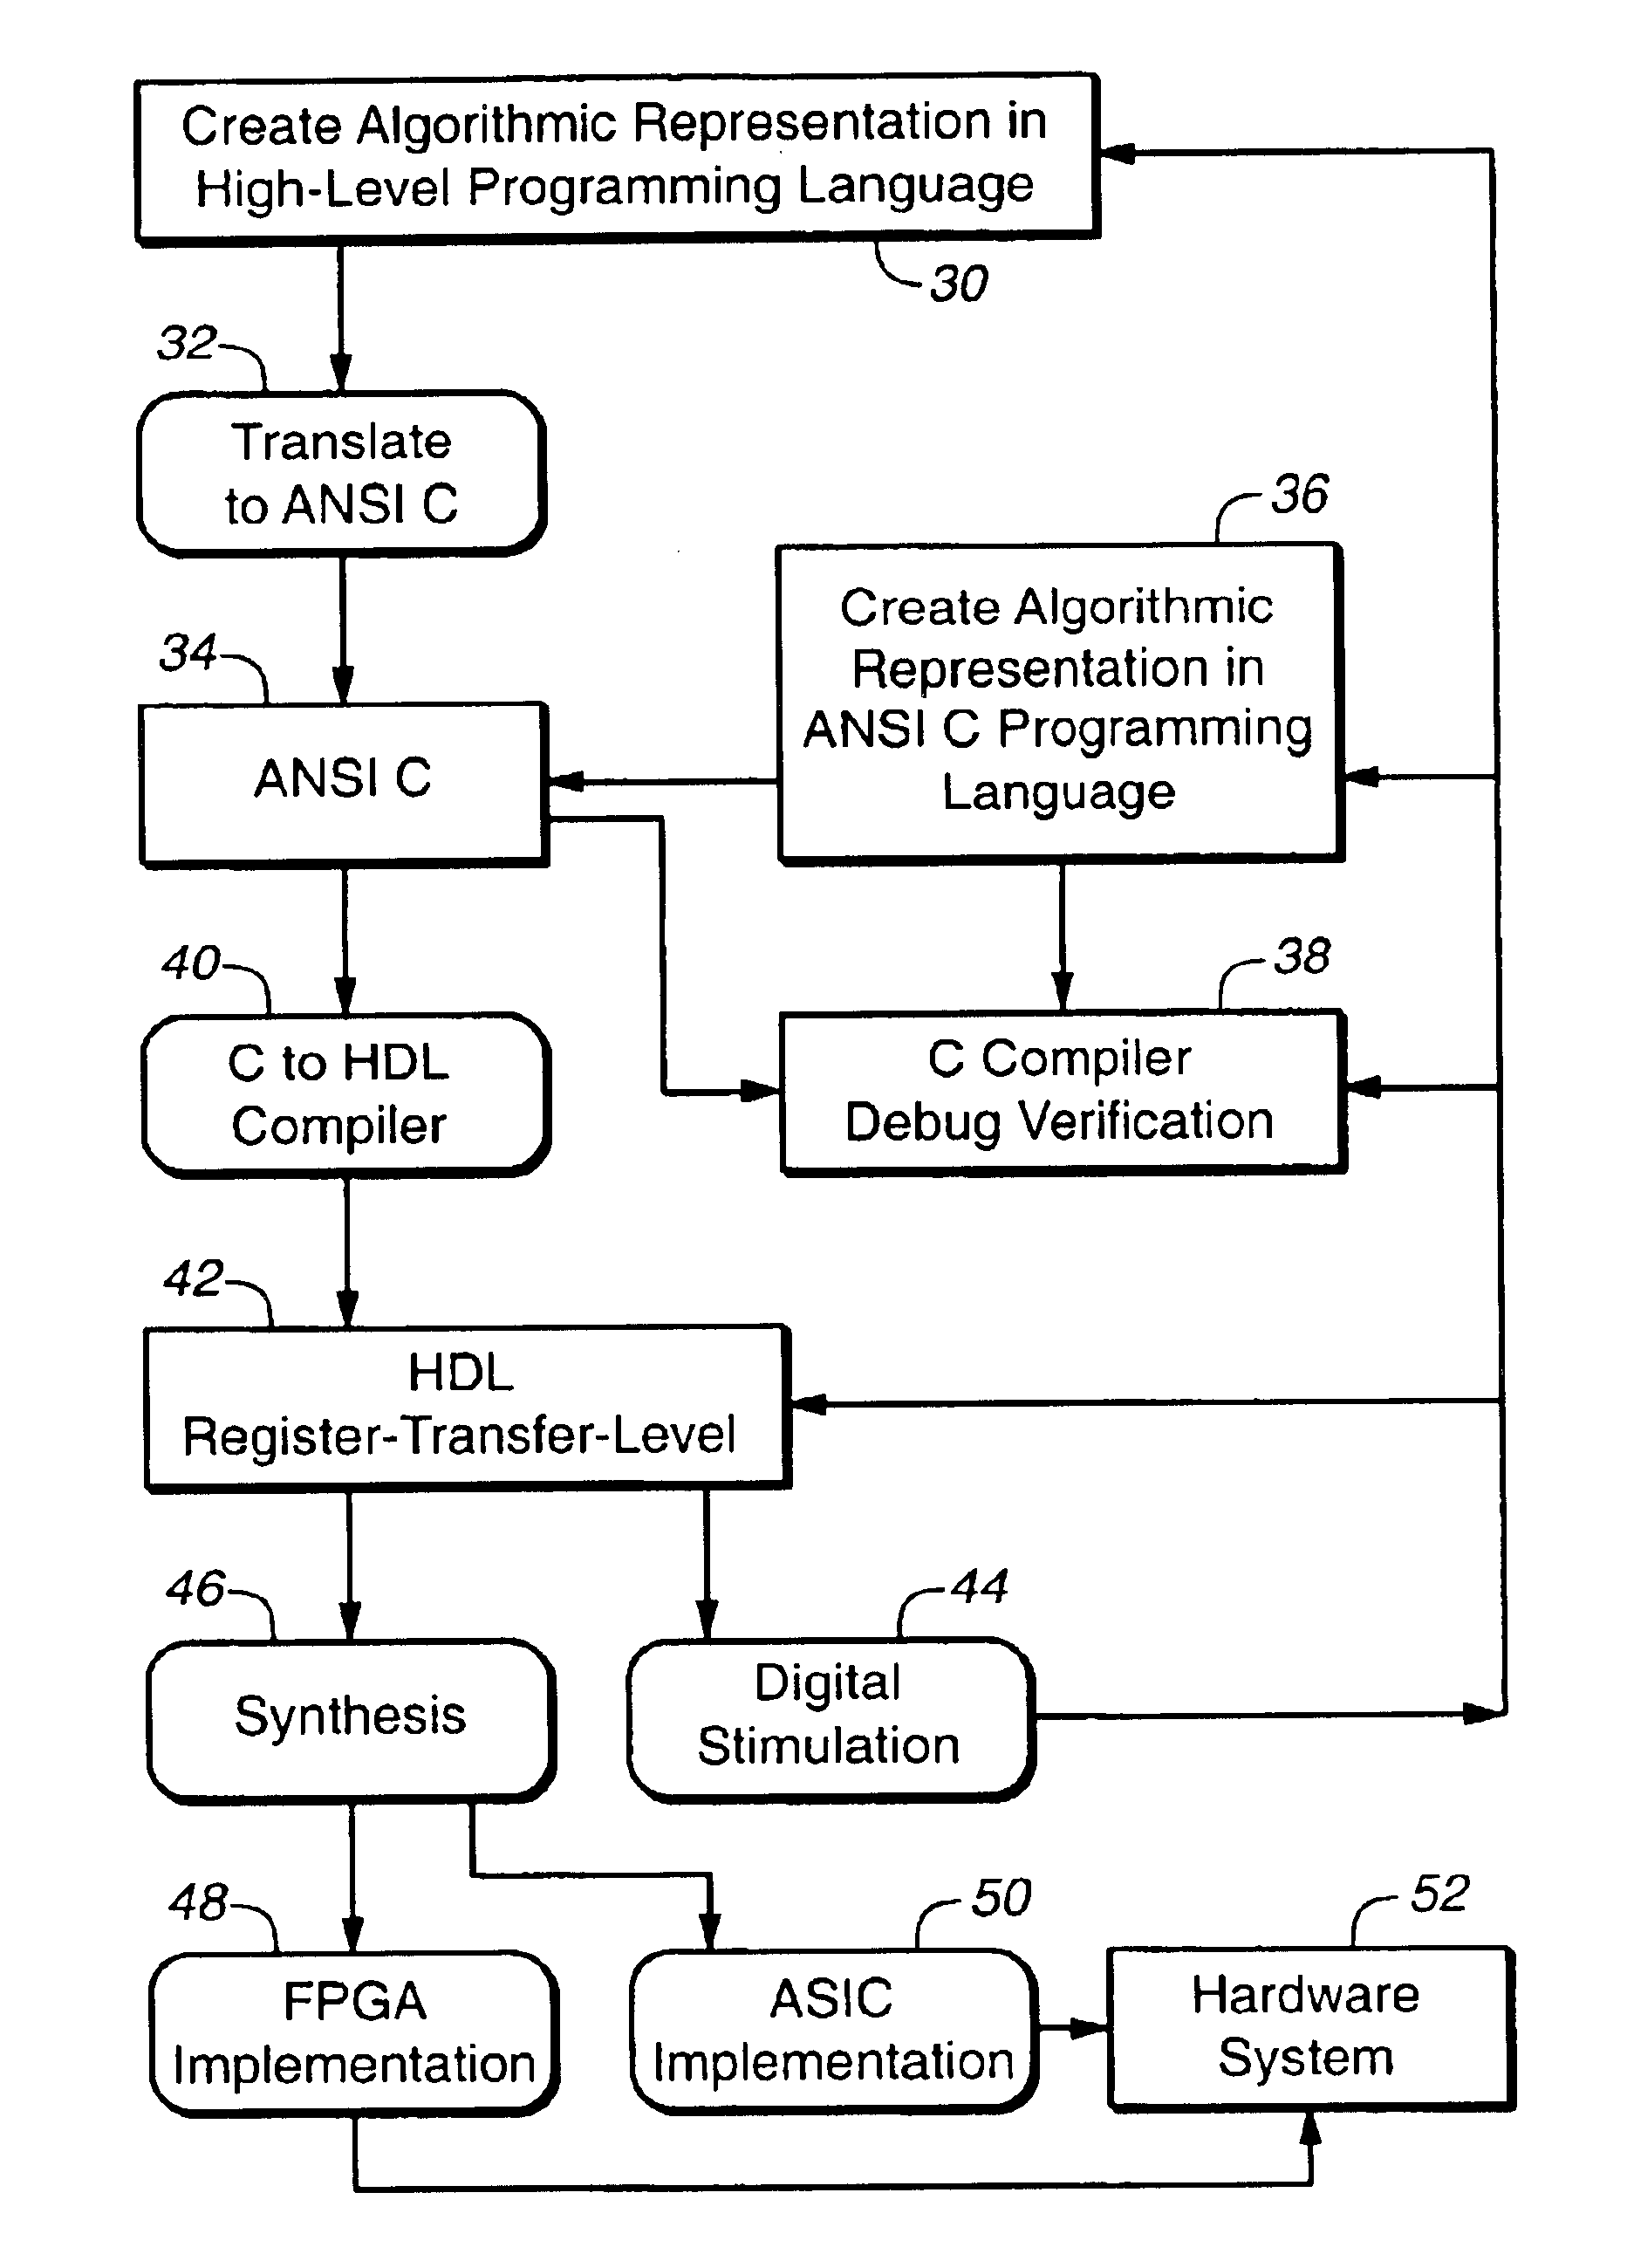 System for converting hardware designs in high-level programming languages to hardware implementations